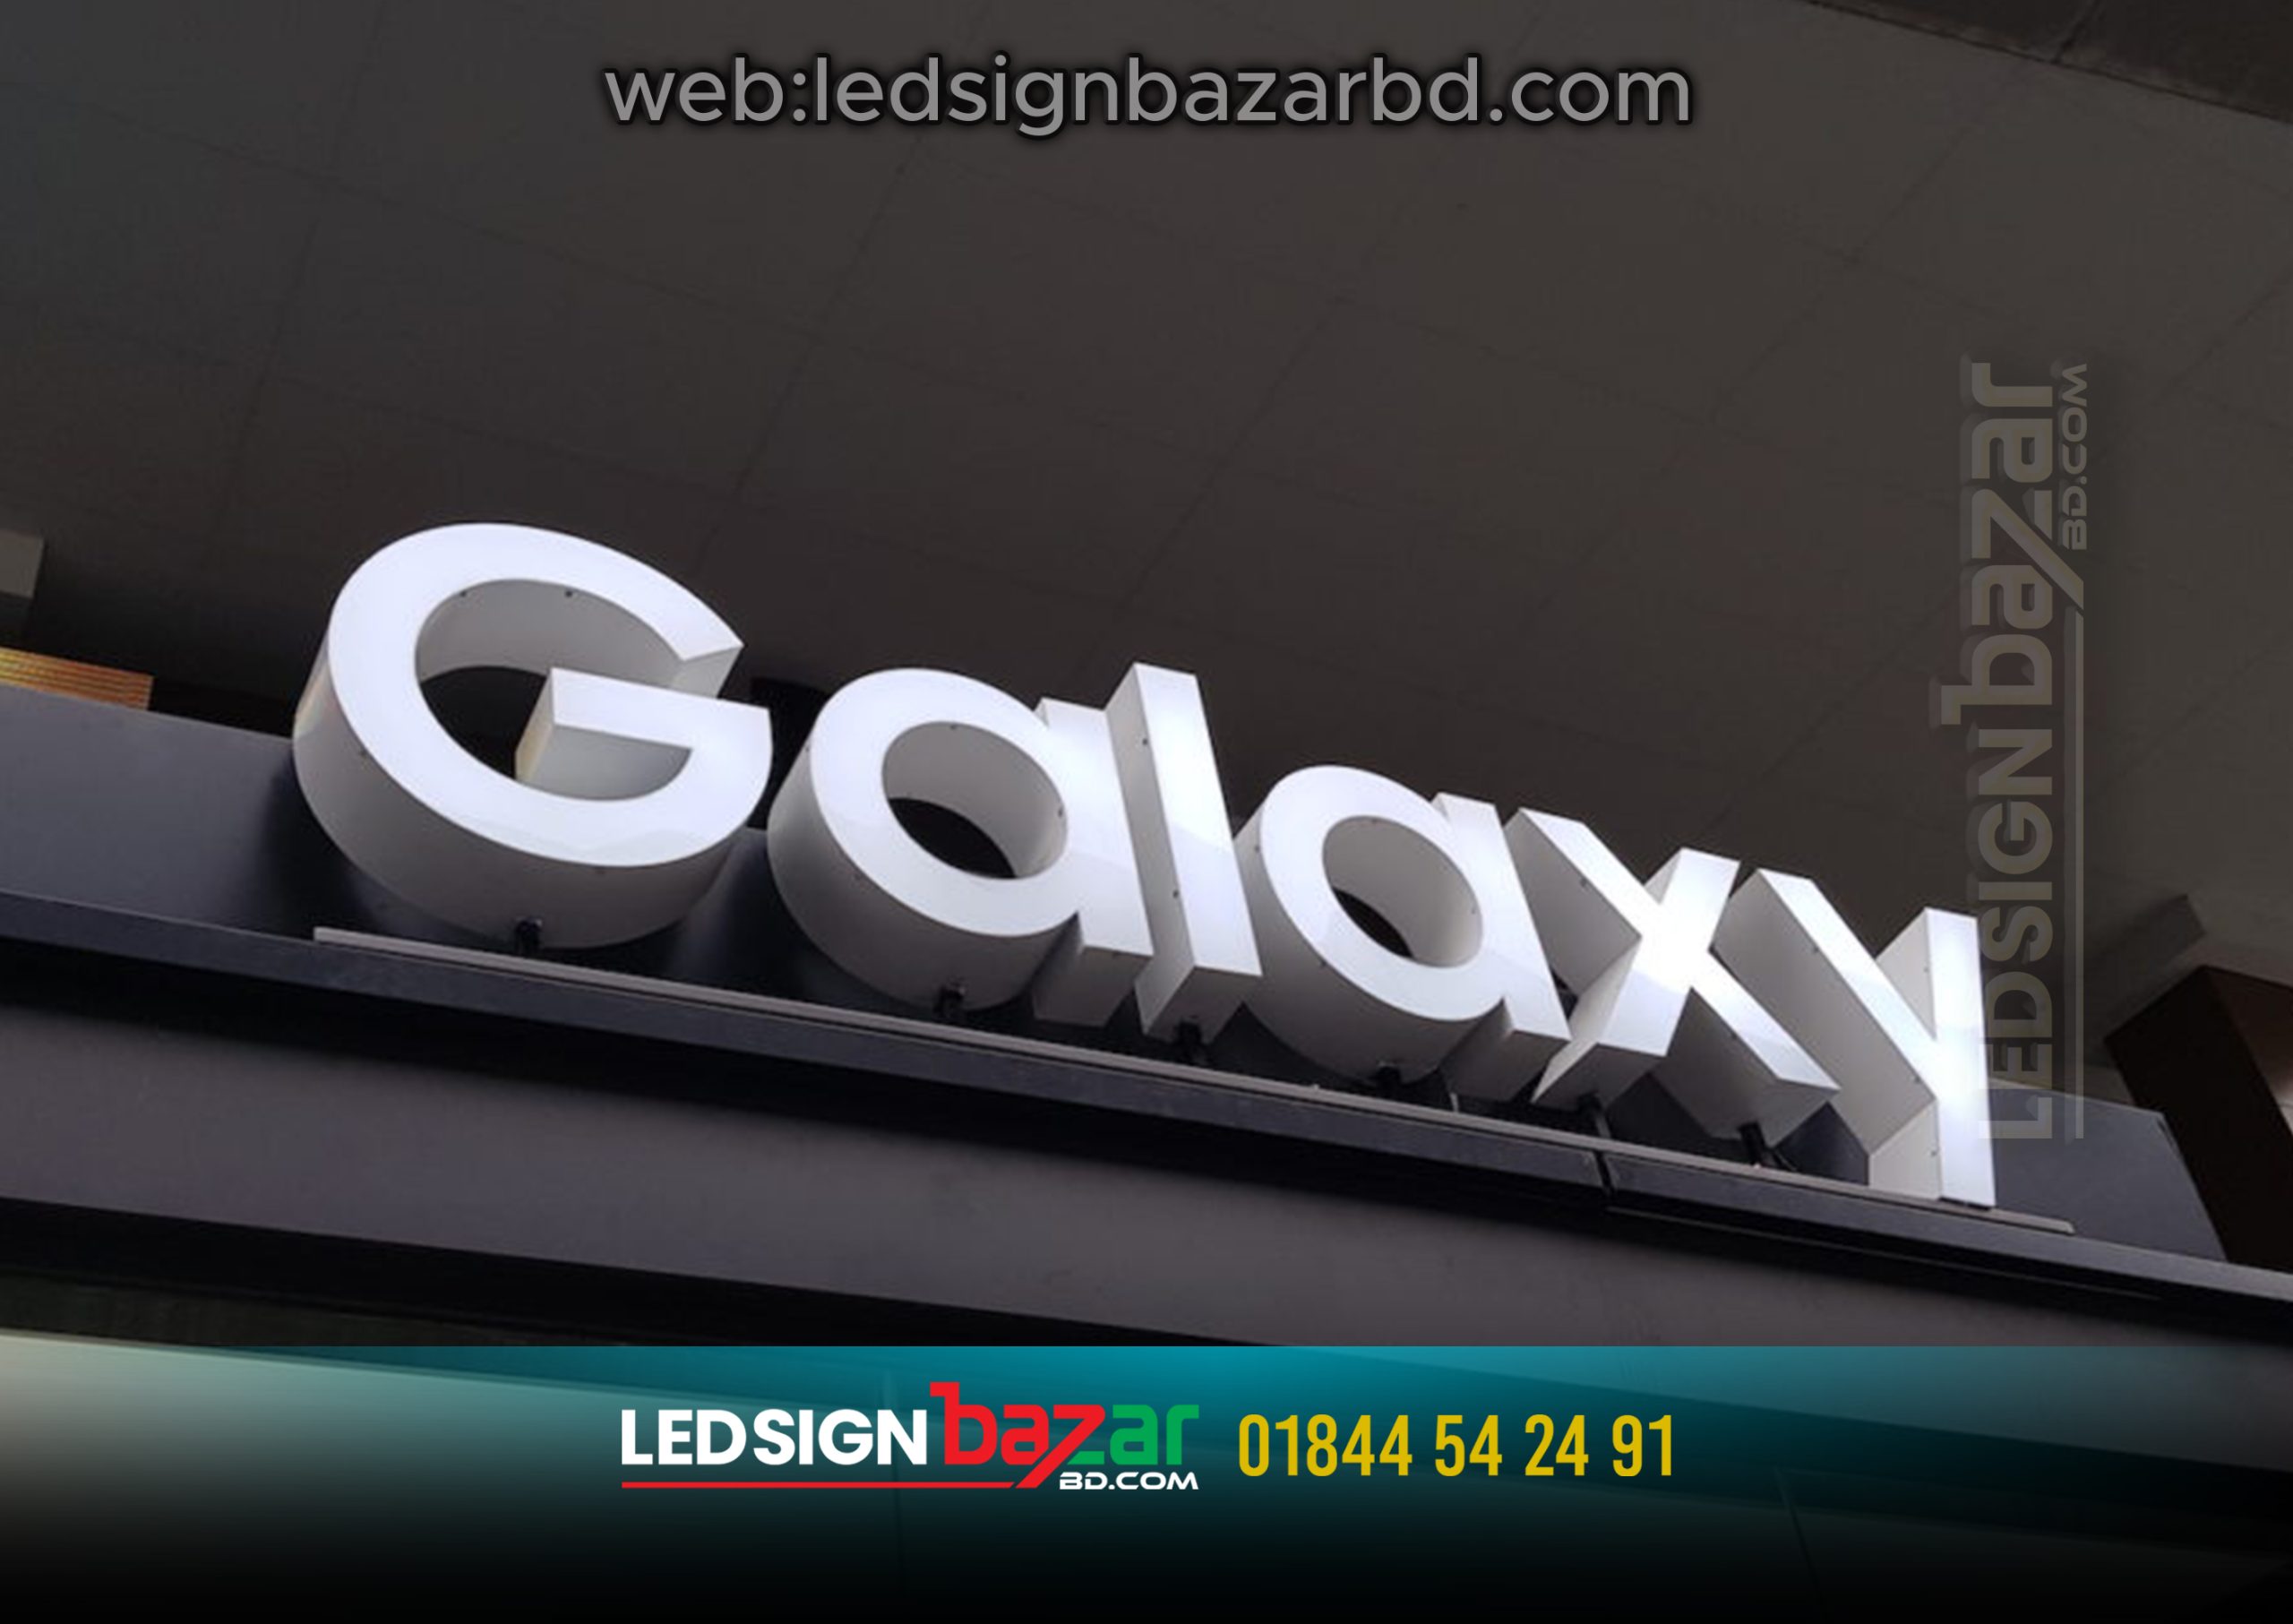 GALAXY LETTER SIGNS, LED SIGN, LETTER SIGNS